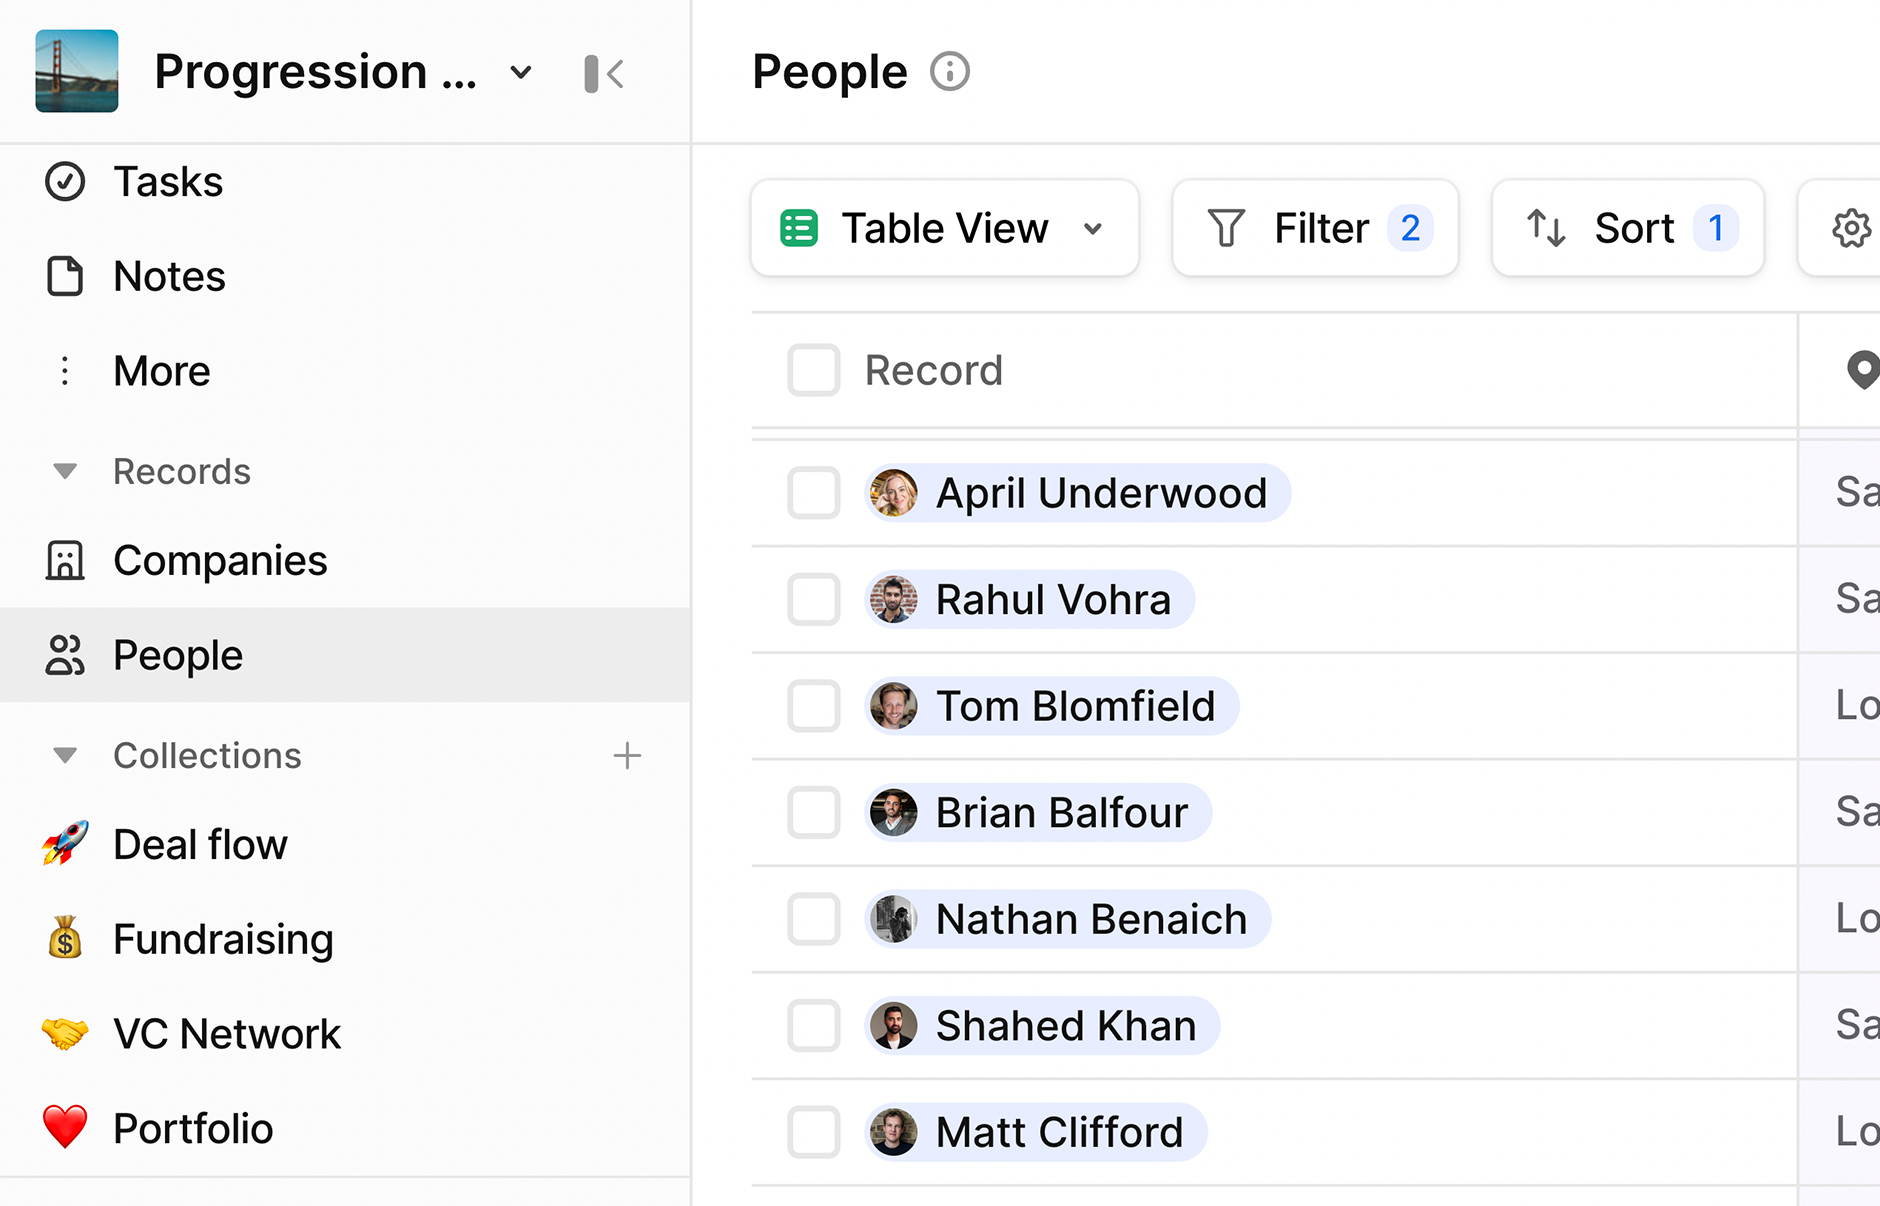 The People tab in the Attio sidebar is selected, displaying every person record in an example workspace. This data is shown as a list of names with avatars in a spreadsheet style.